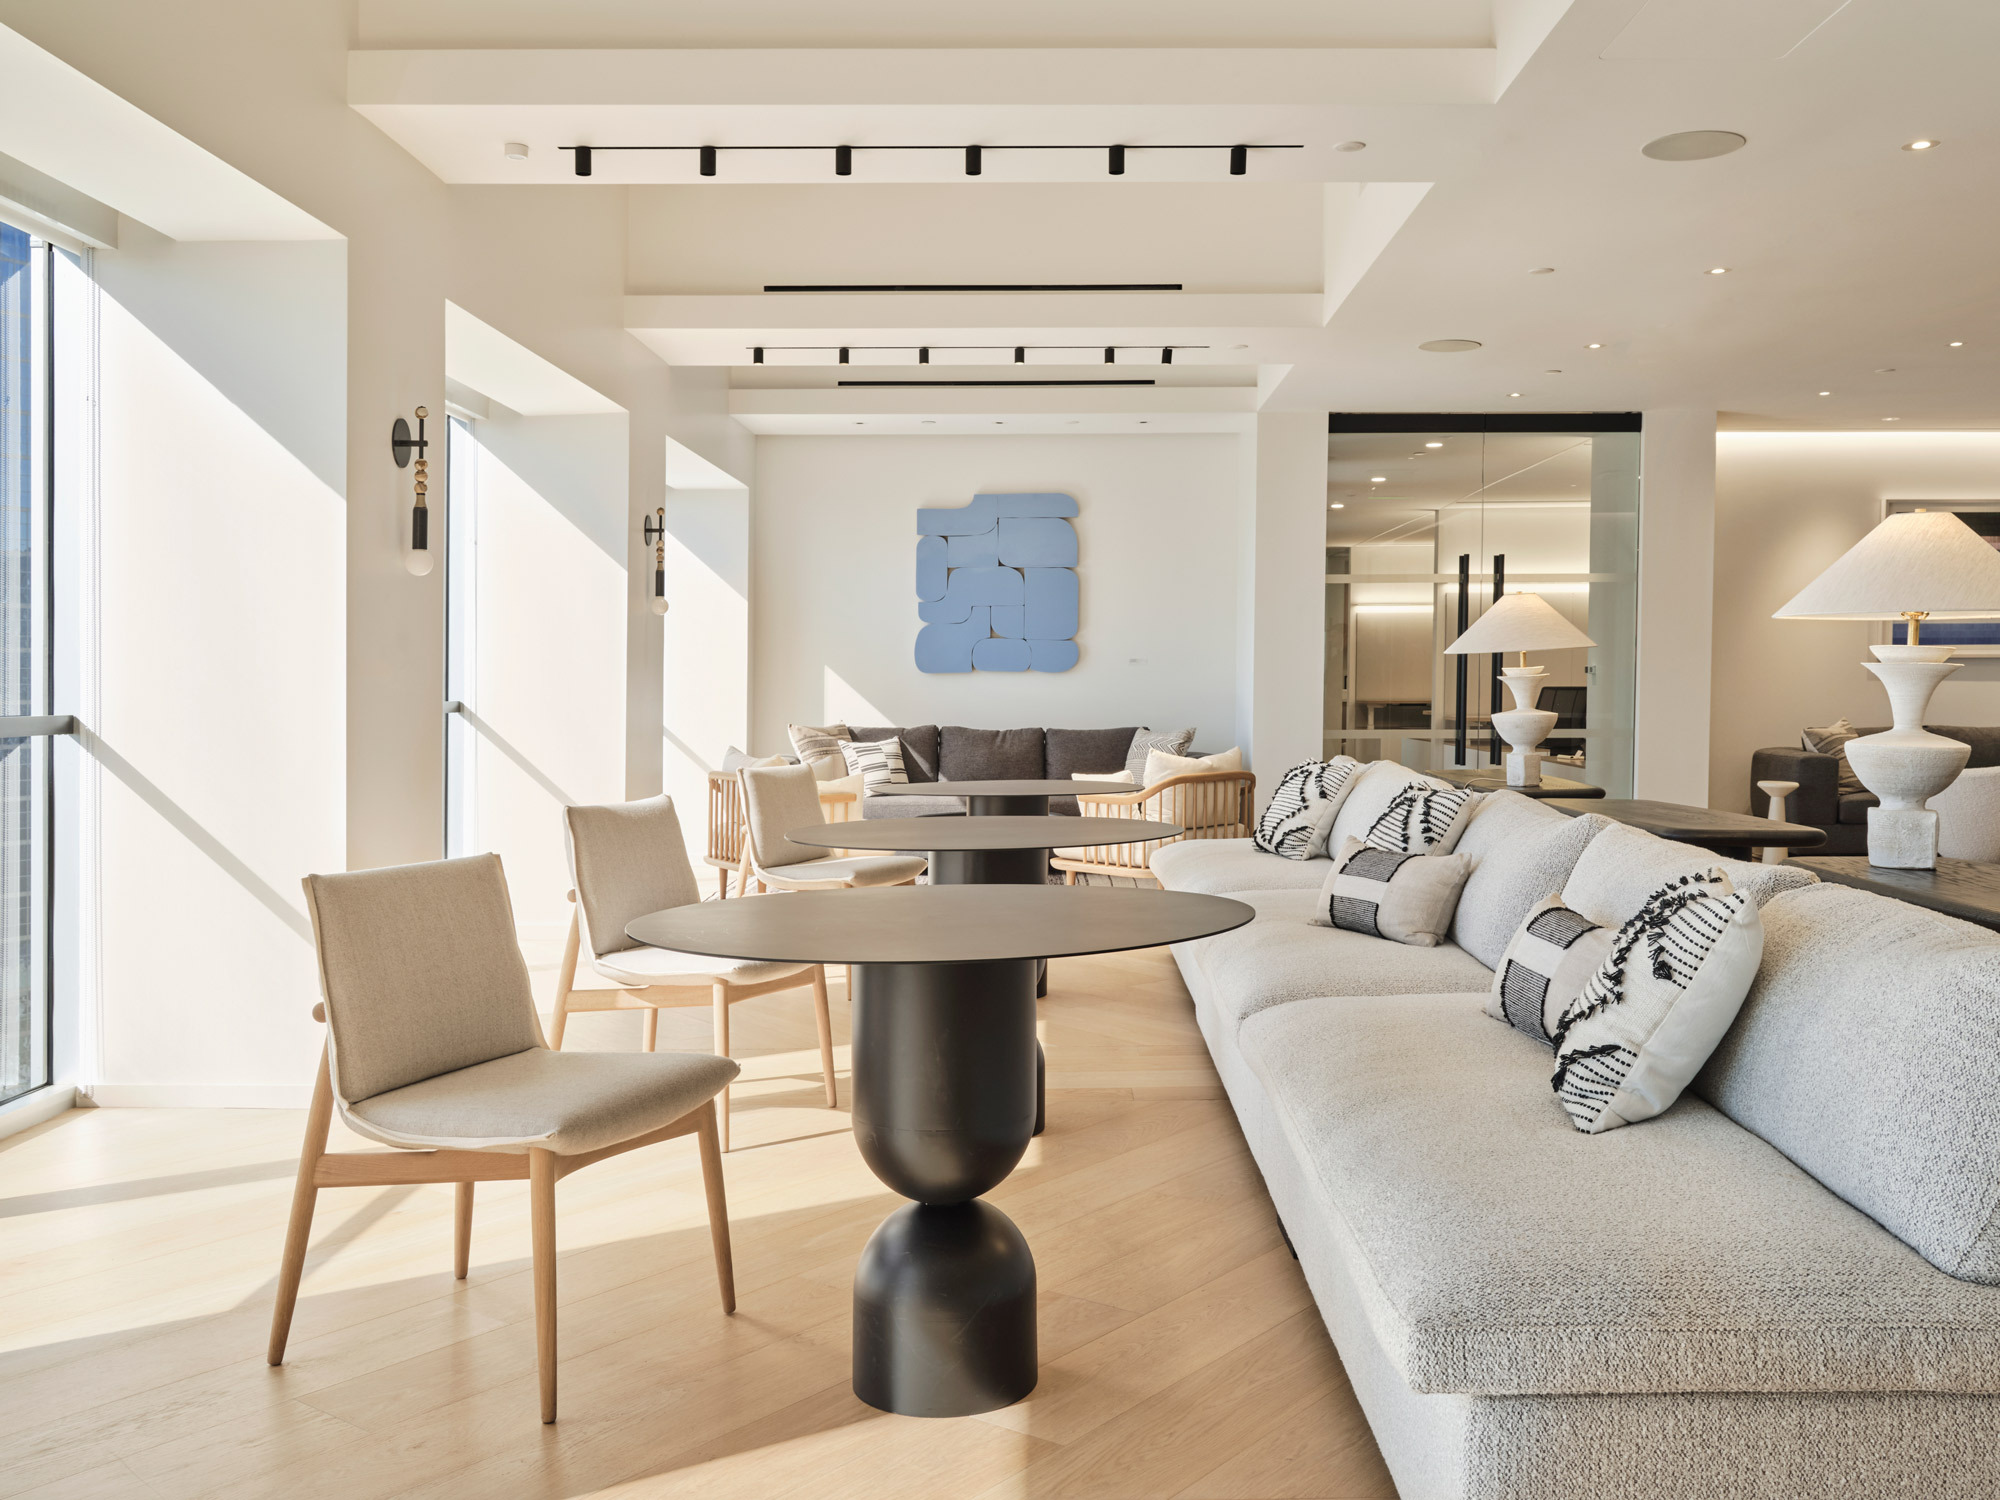 Spacious living room with abundant natural light, featuring a minimalist color palette. Sleek, low-profile furniture with neutral upholstery complements the light wooden flooring and white beam ceiling, accented by a bold blue abstract wall art.